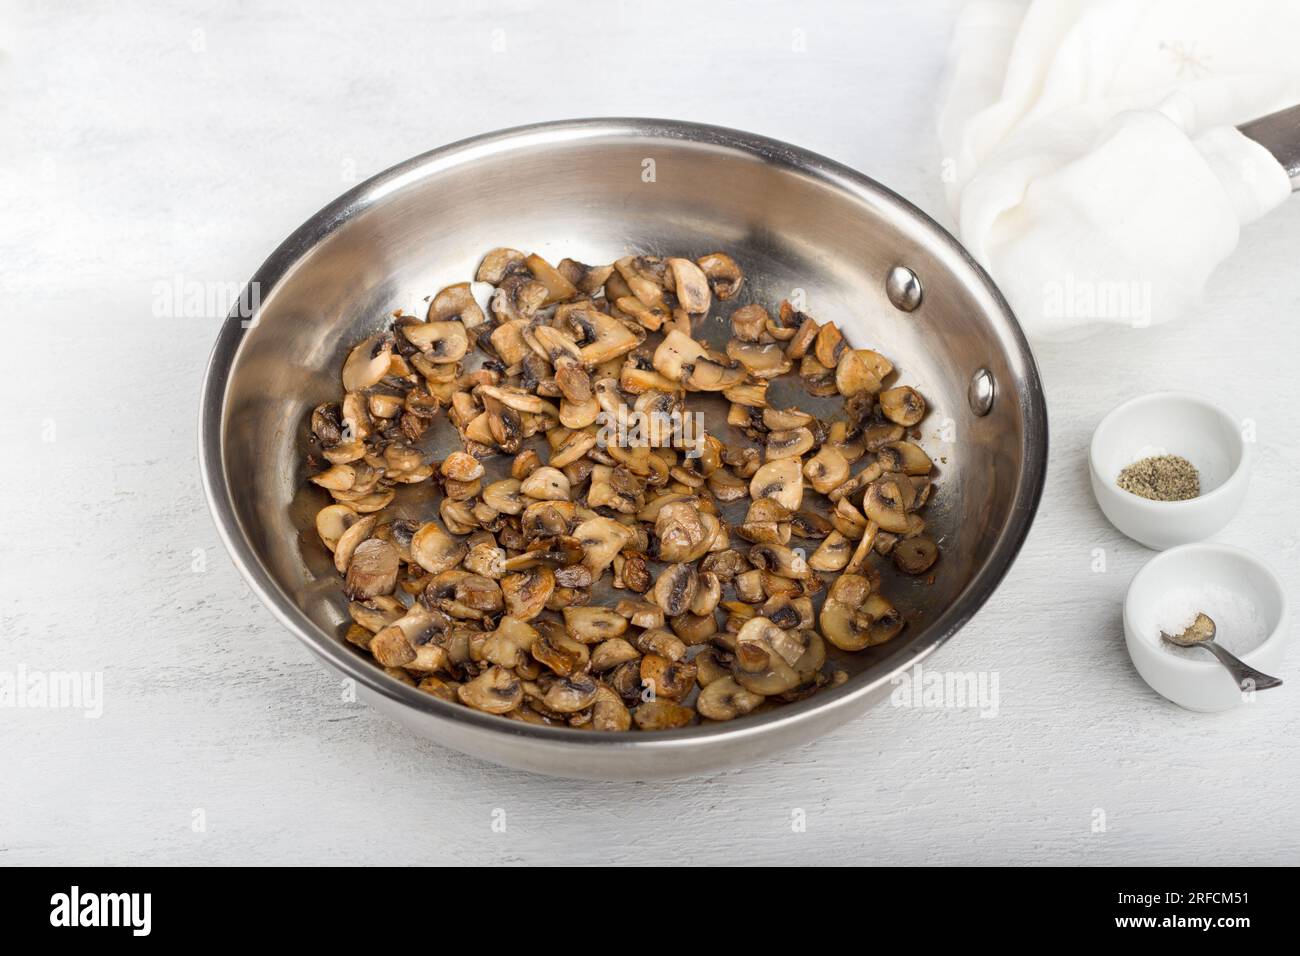 Frying pan with fried champignon mushrooms with spices on a light gray background. Stage of cooking a delicious vegetarian dish. Stock Photo